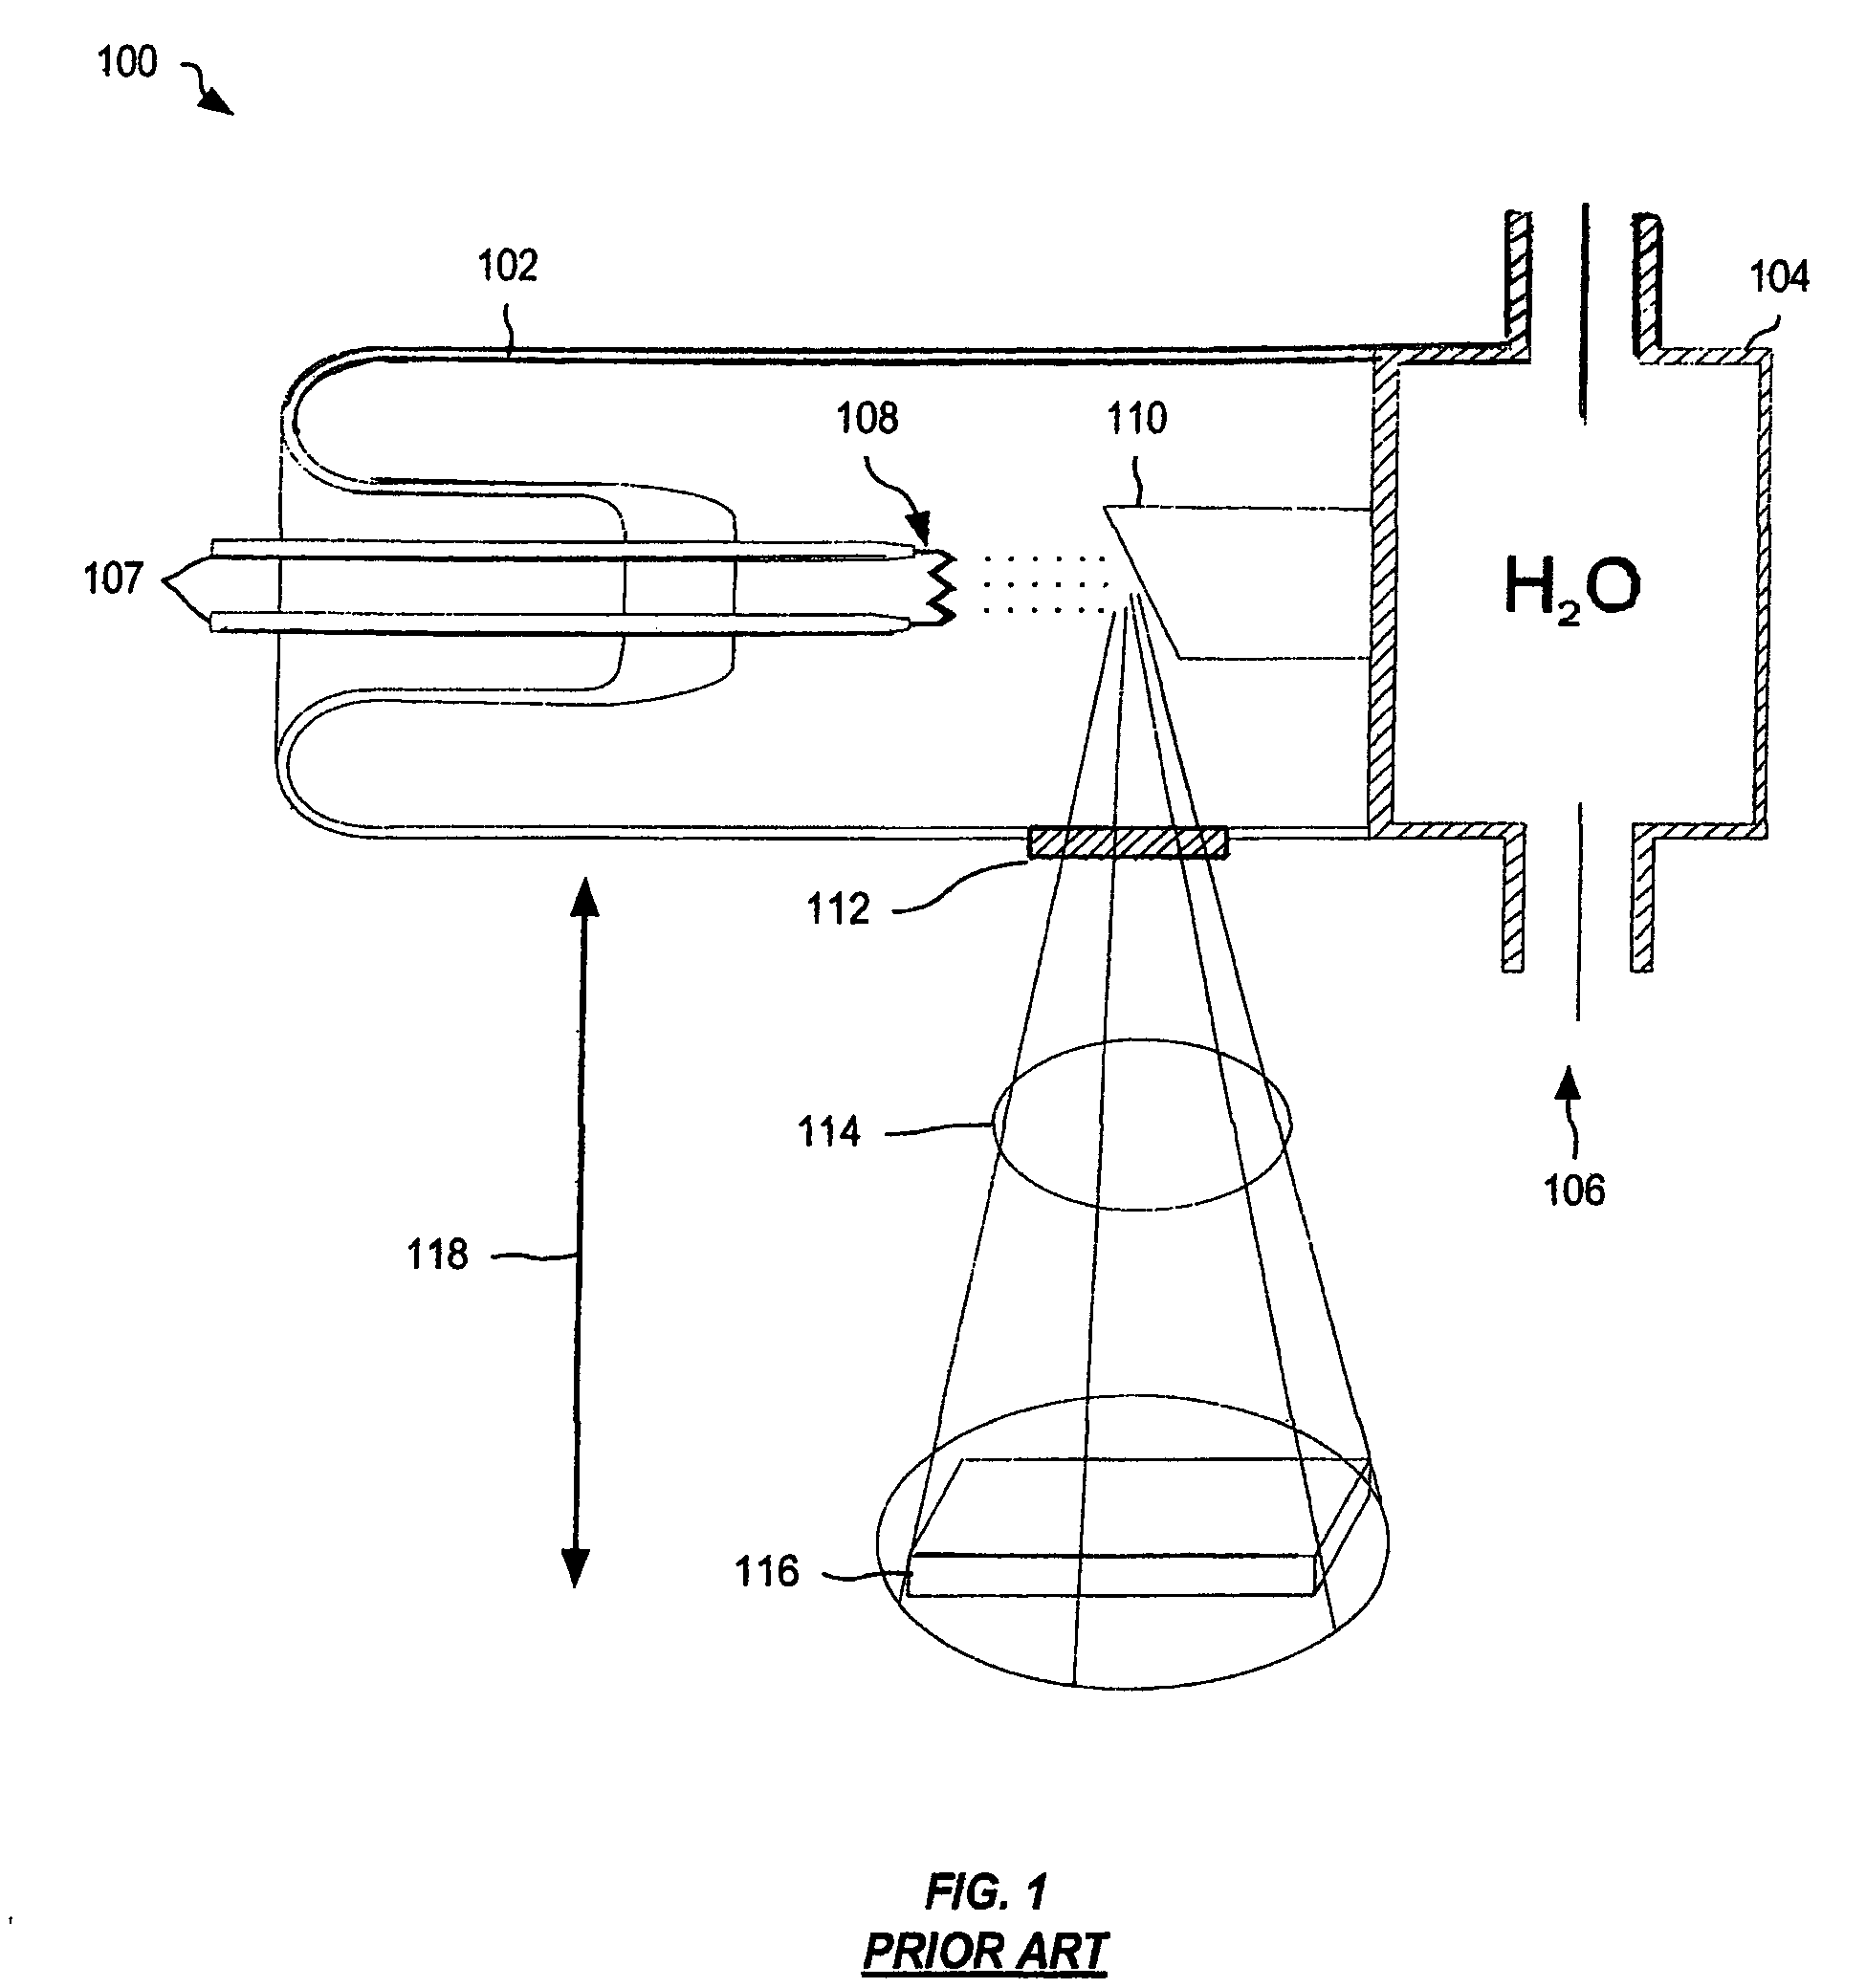 X-ray system for irradiating material used in transfusions